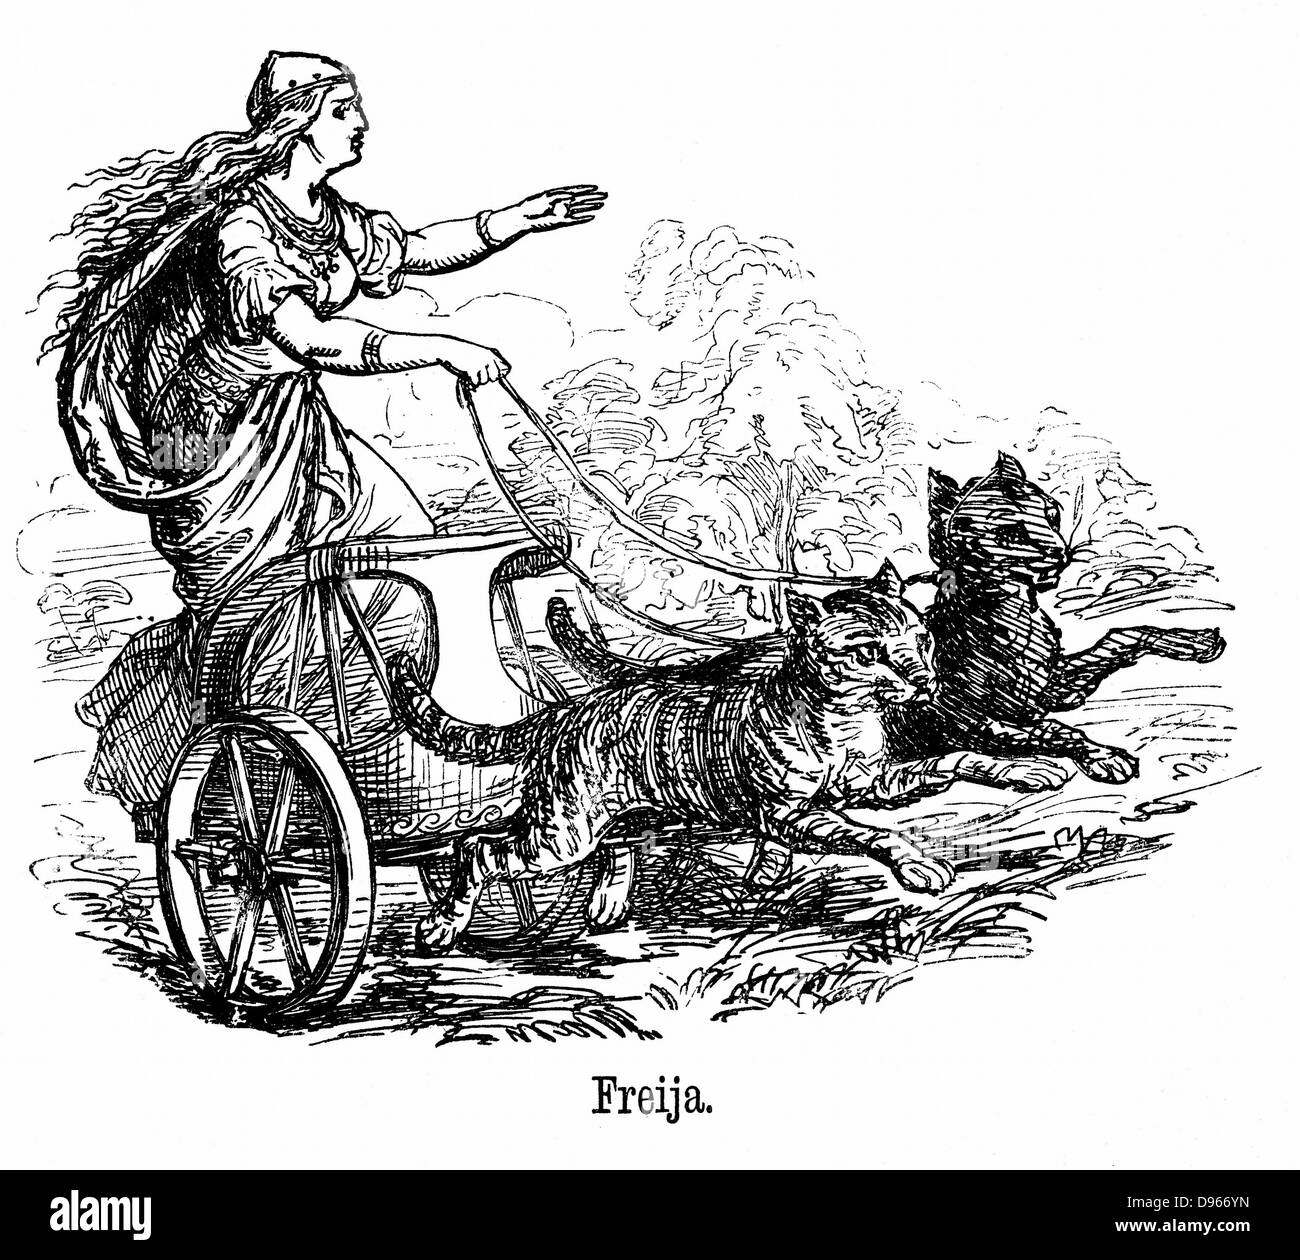 Freya or Frigg goddess of love in Scandinavian mythology, wife of Wotan or Odin, driving her chariot pulled by cats. Friday is named for her. Engraving Stock Photo